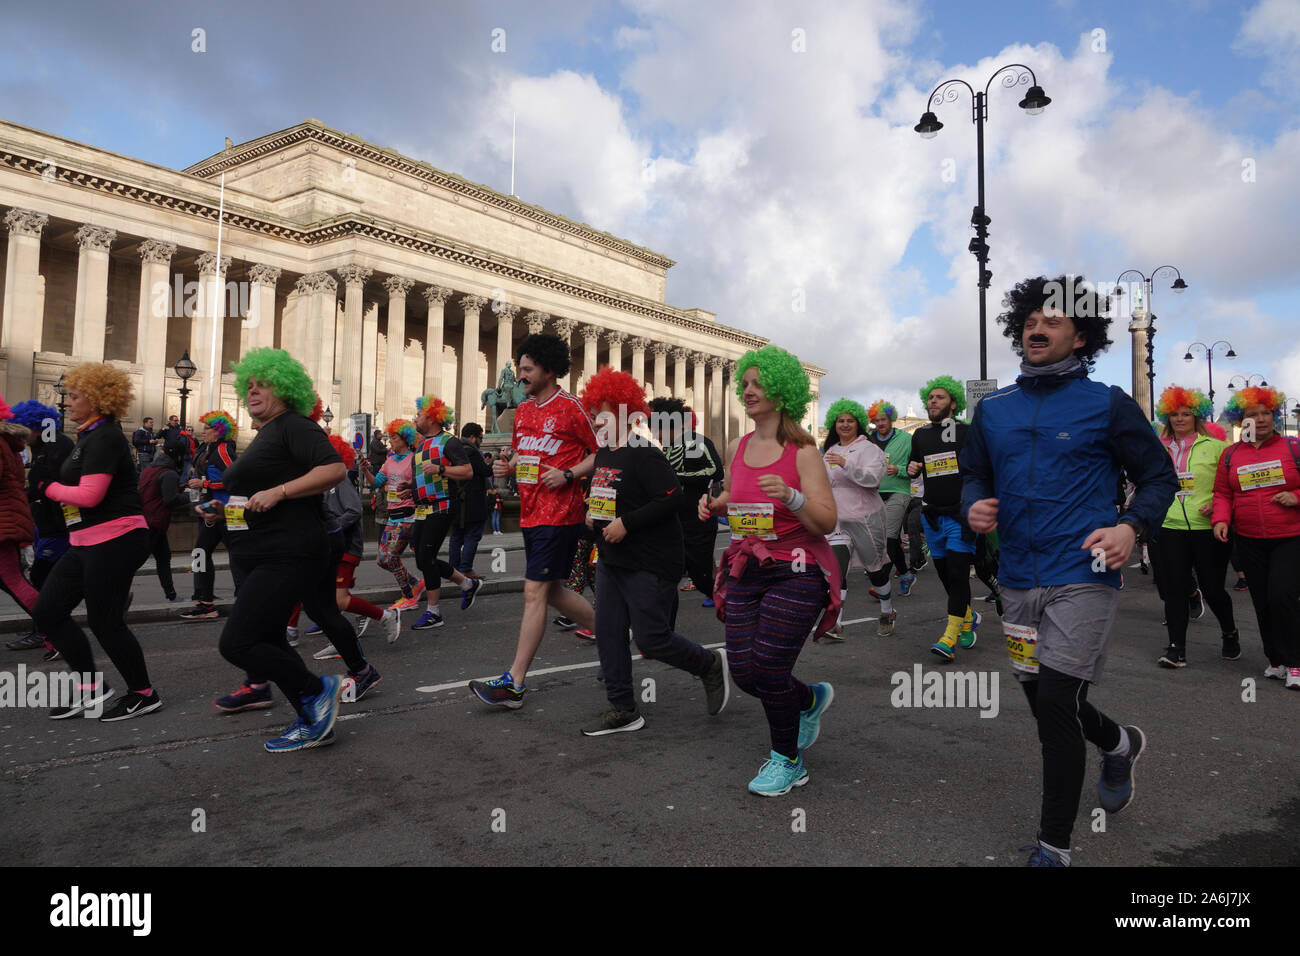 Liverpool, UK. 27th October 2019. The Arriva Liverpool Scouse 5k fun run where everybody gets a choice of wig colour to wear on the day. Colours include Pretty Pink, Kopite Red, Toffee Blue, Classic Black and Wheelie Bin Purple.Credit: Ken Biggs/Alamy Live News. Stock Photo